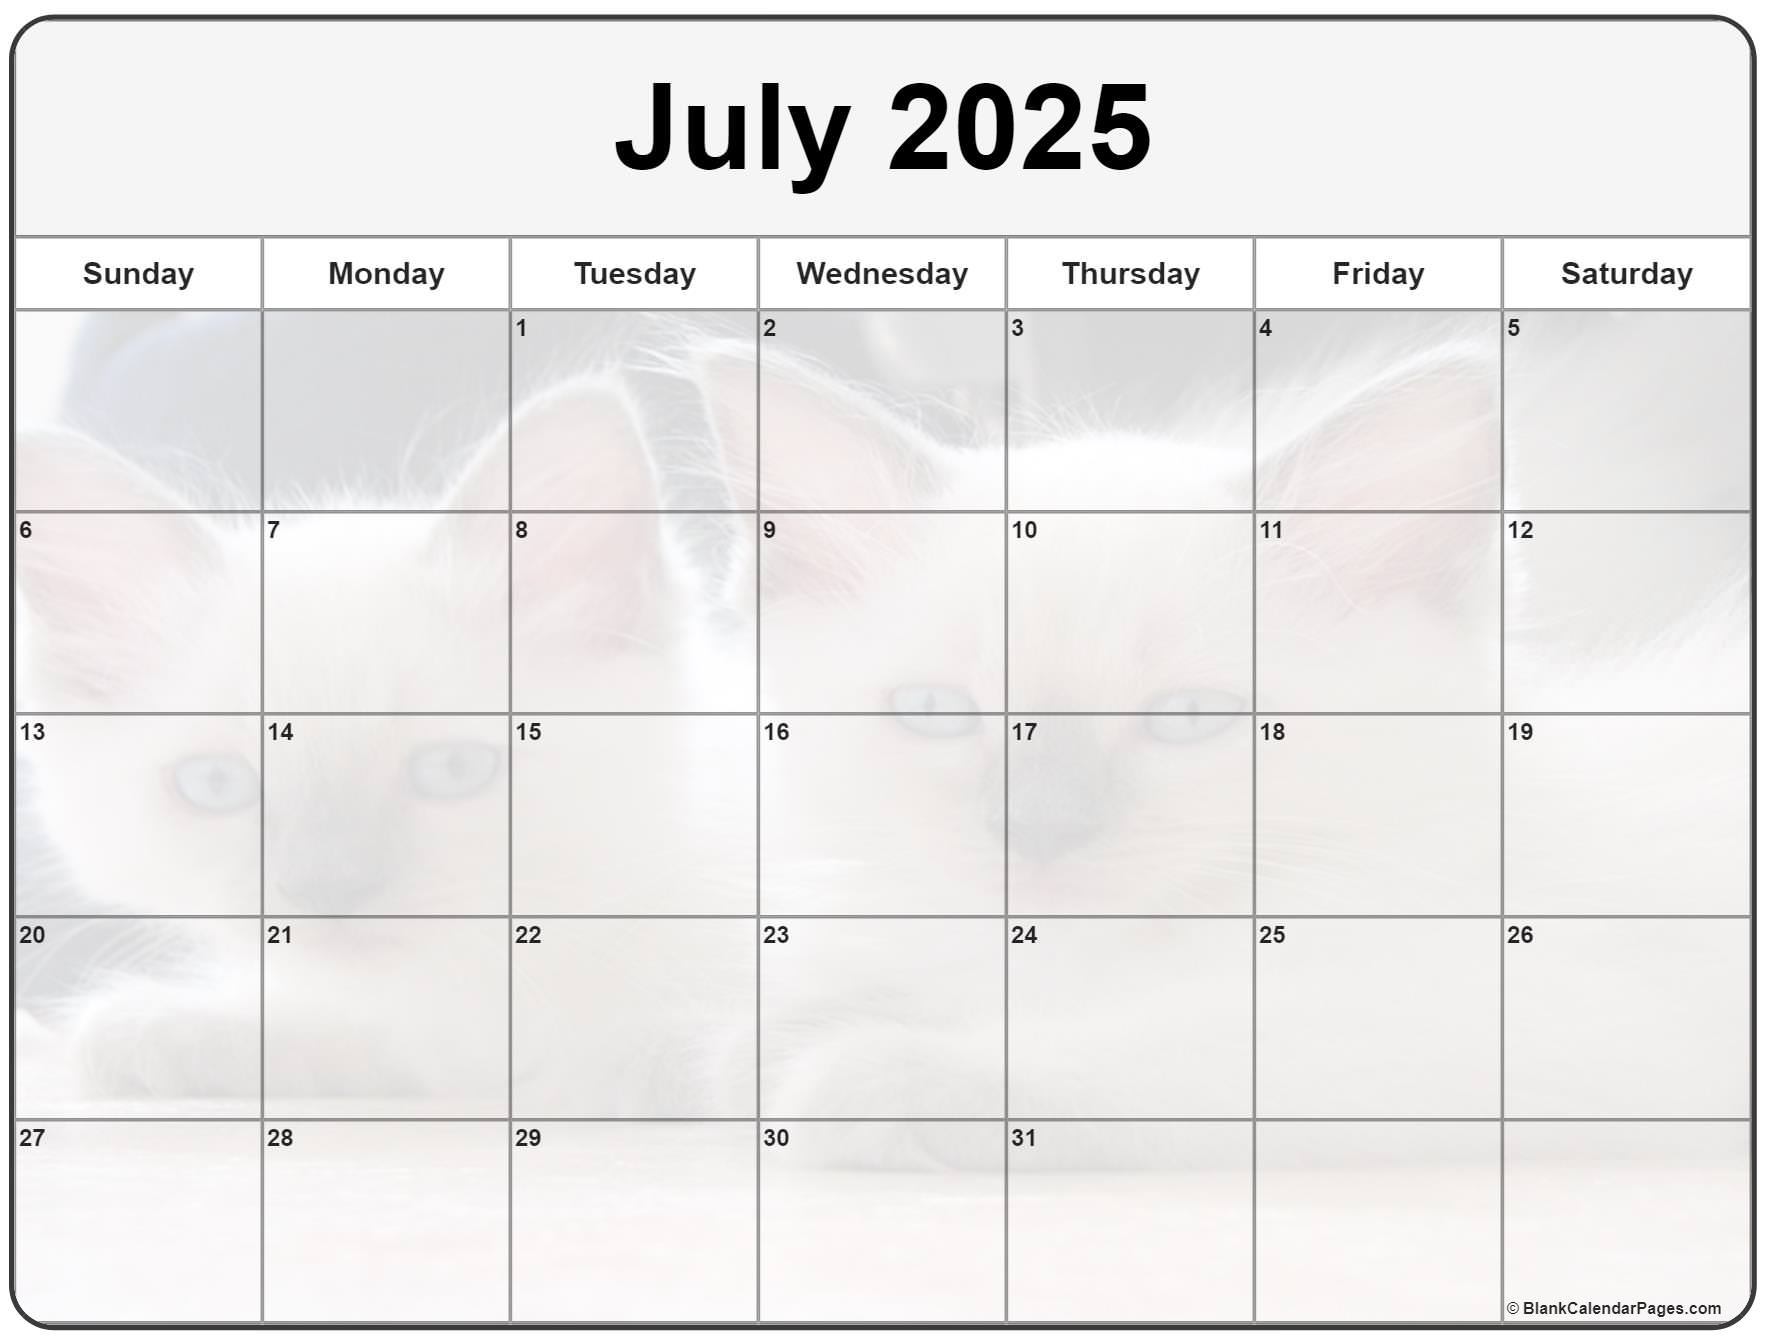 Collection of July 2025 photo calendars with image filters.